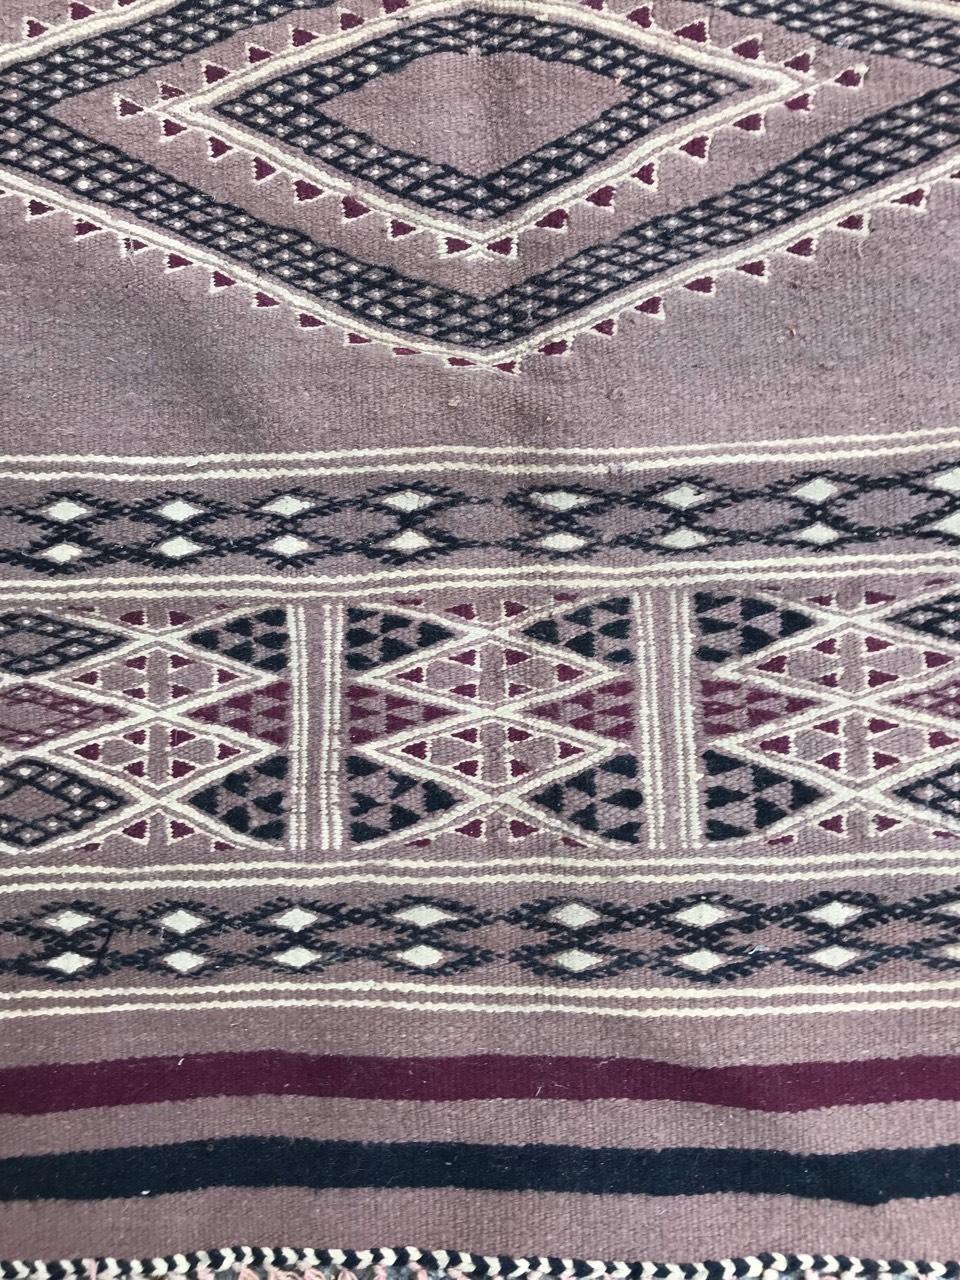 Nice 20th century Moroccan Kilim with a beautiful geometrical tribal design a pink field color, entirely handwoven with wool on cotton foundation.